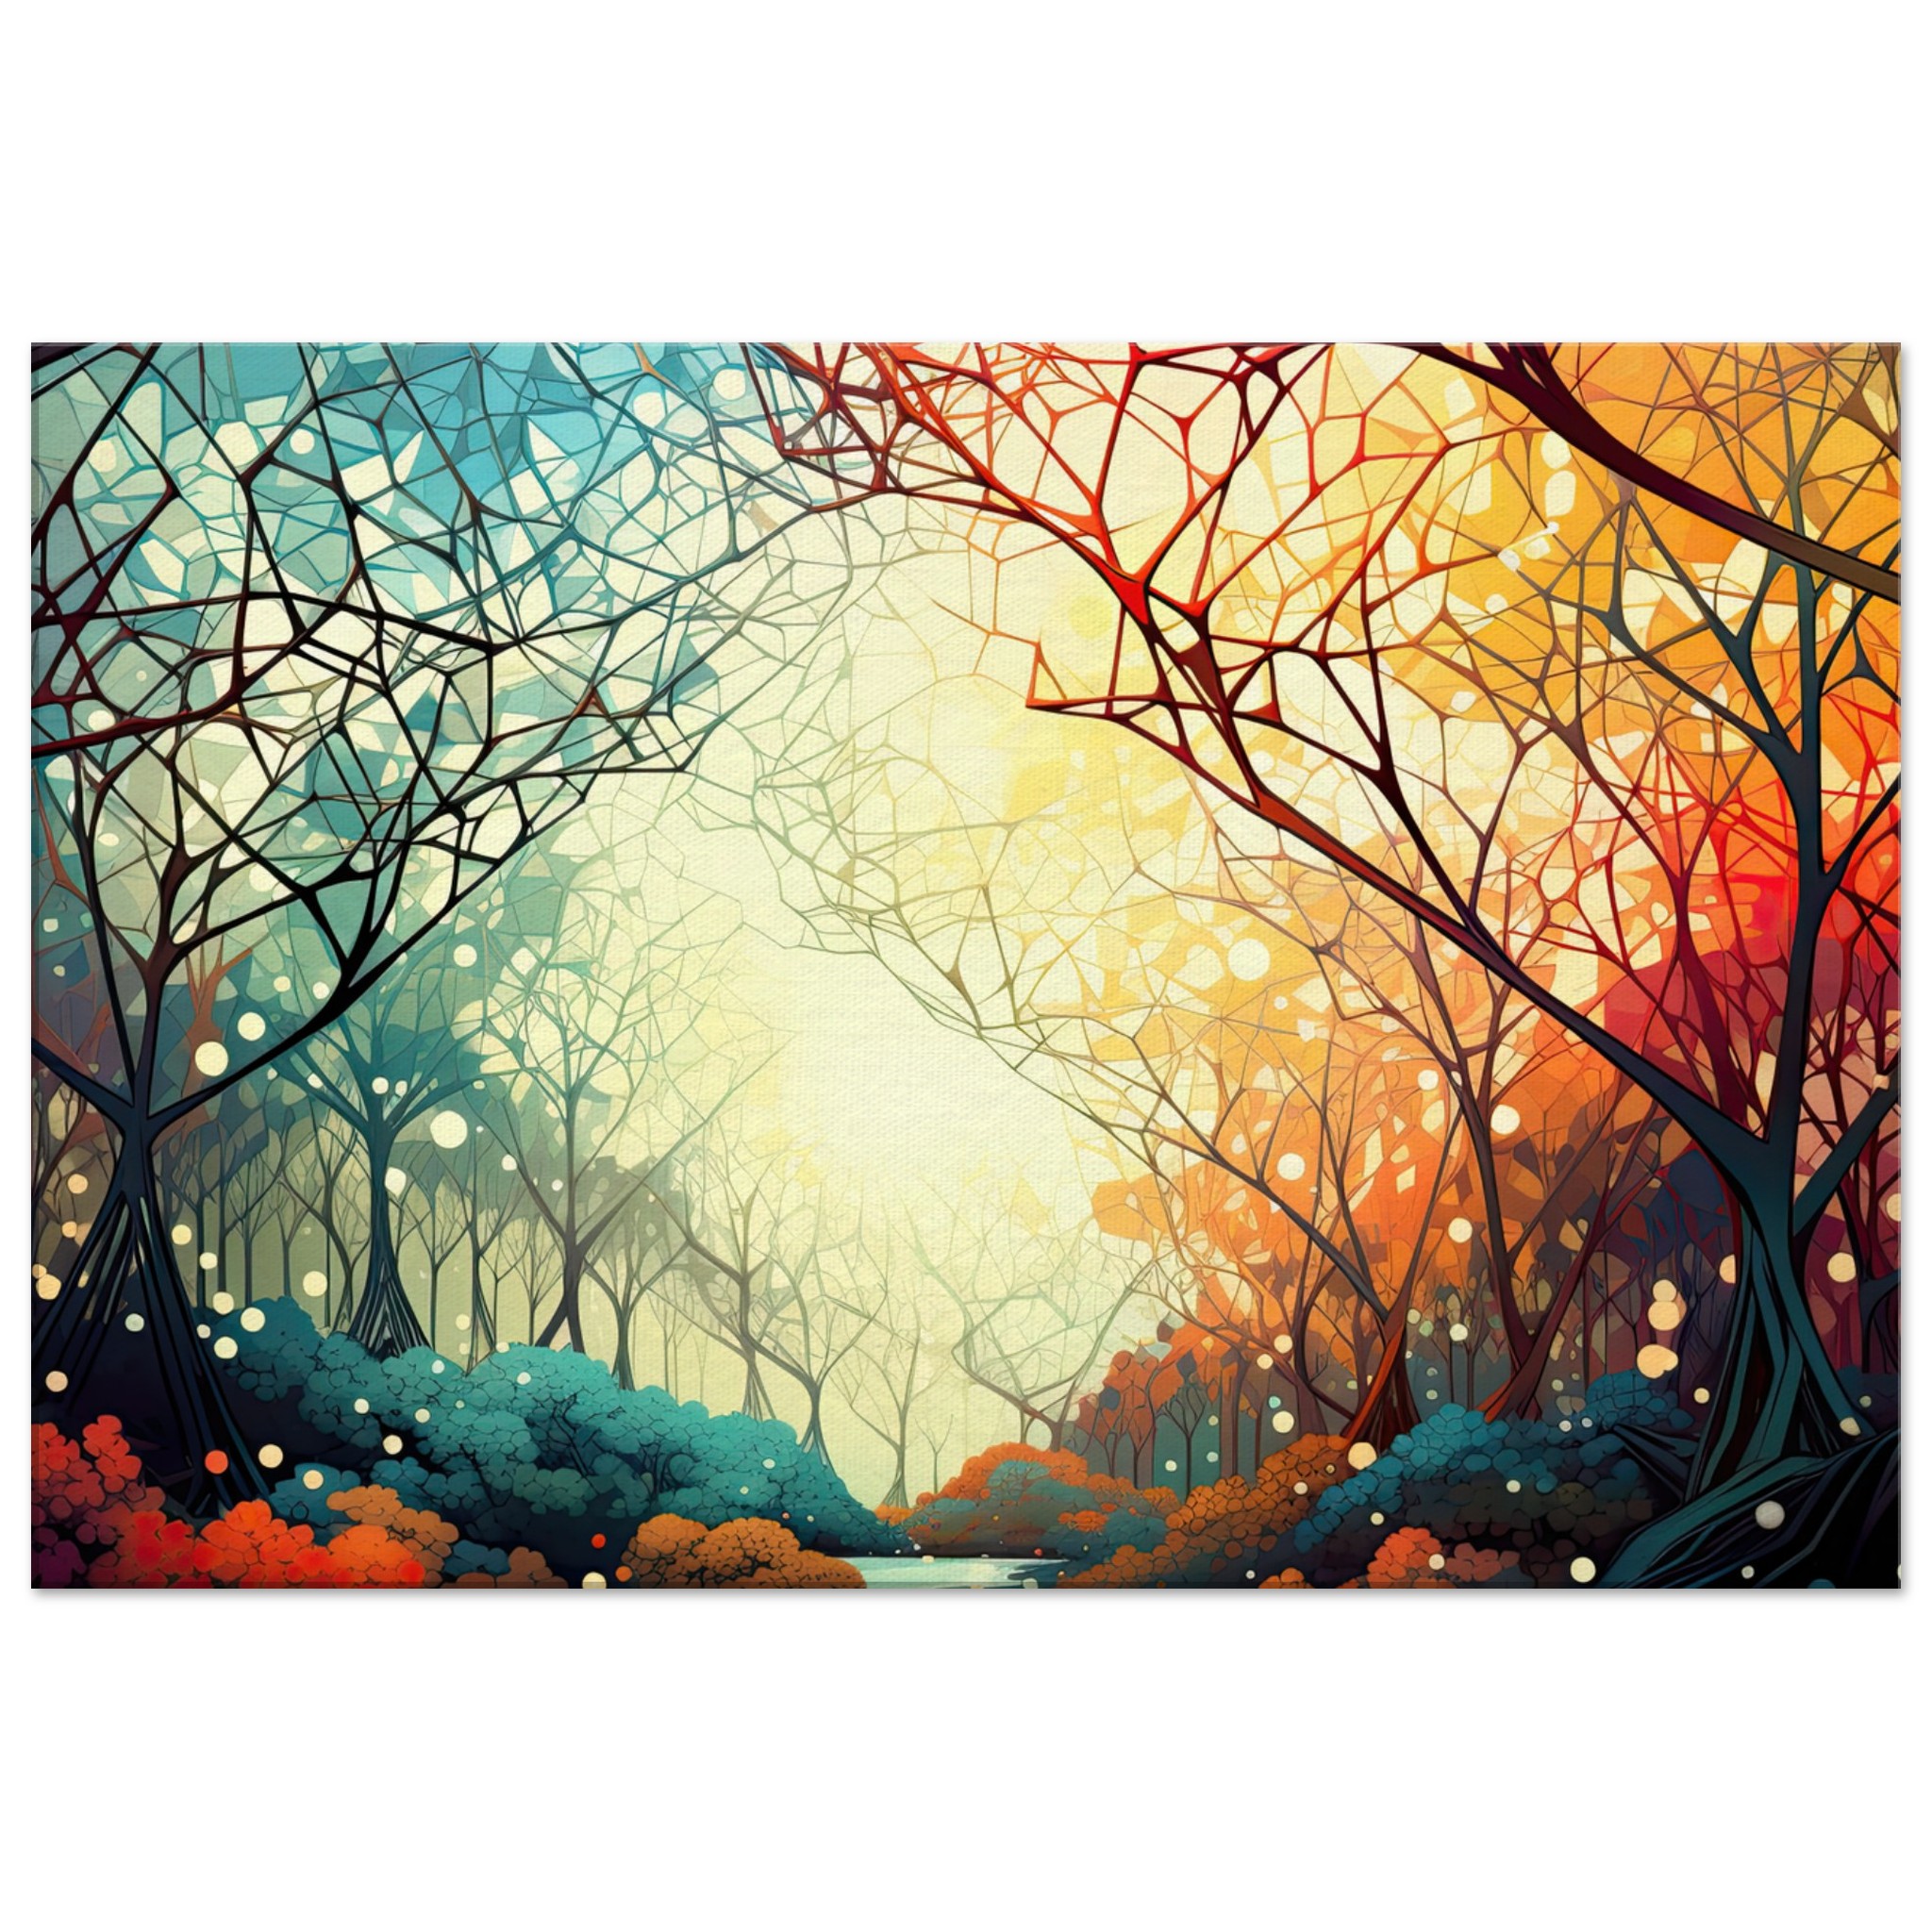 Forest Colorful Abstract Landscape Canvas Print – 60×90 cm / 24×36″, Slim